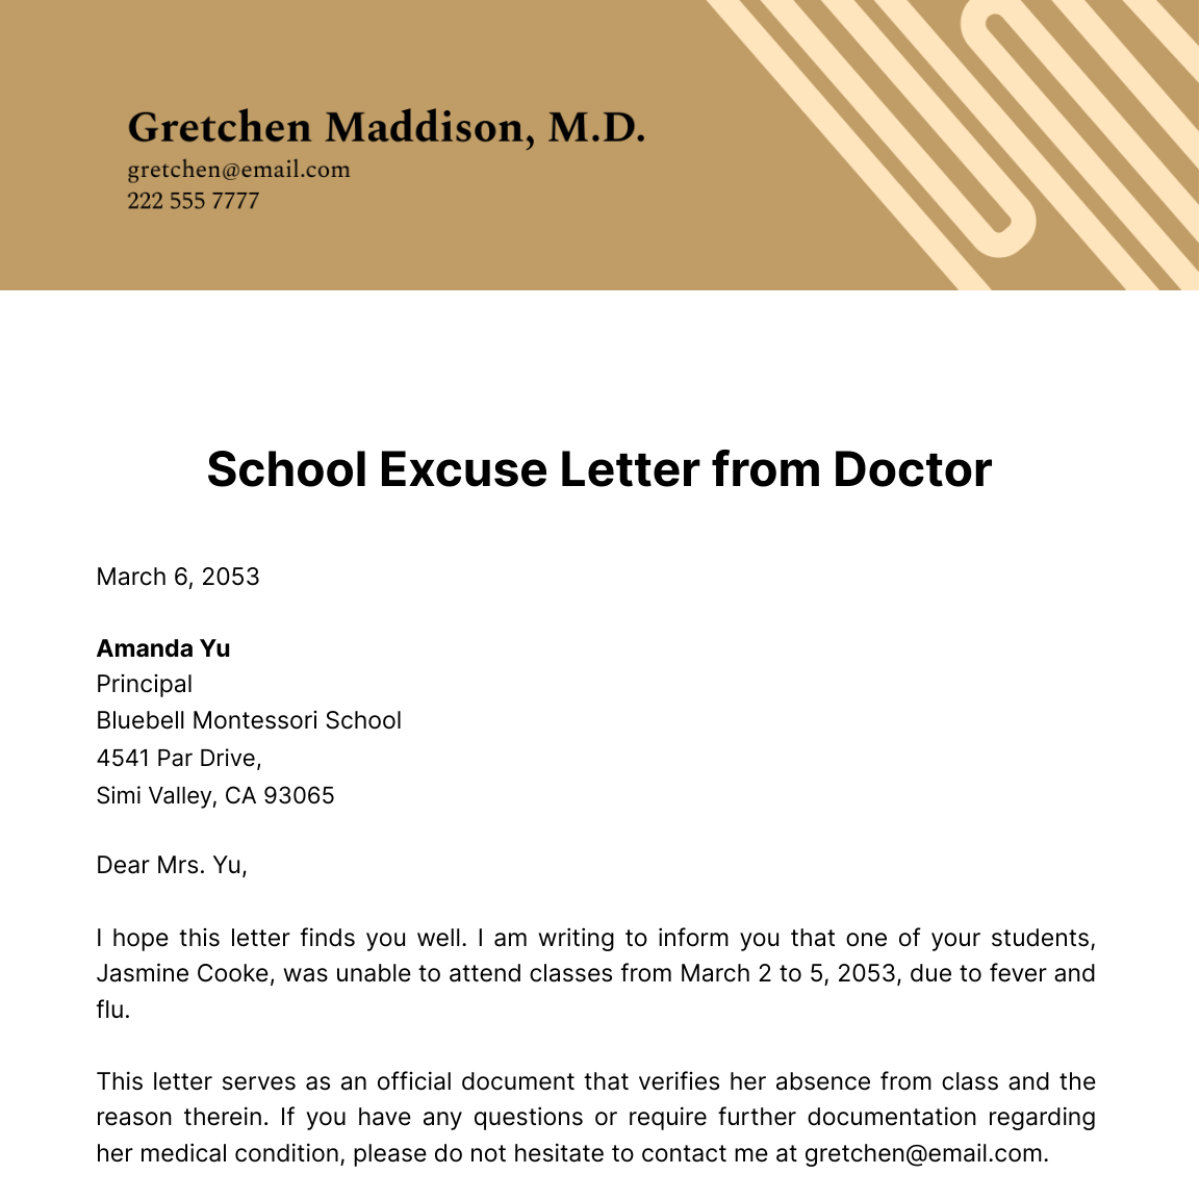 School Excuse Letter from Doctor Template